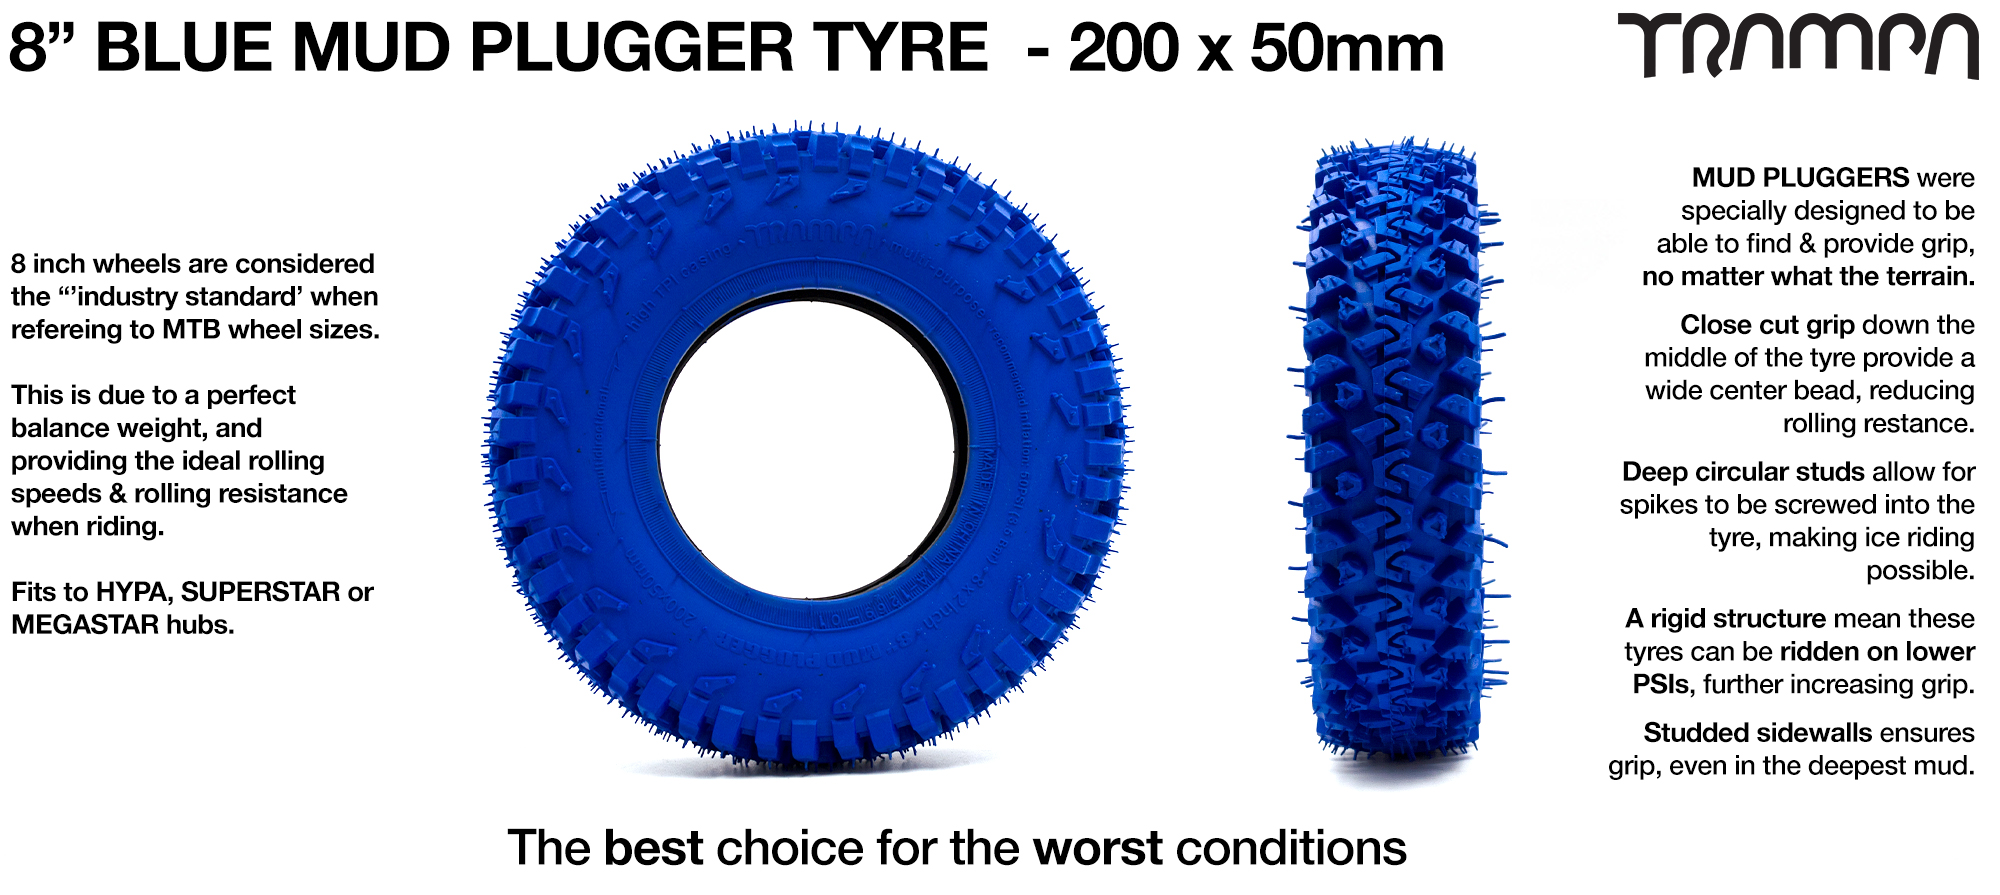 8 Inch TRAMPA Mud-Plugger Tyre - BLUE 